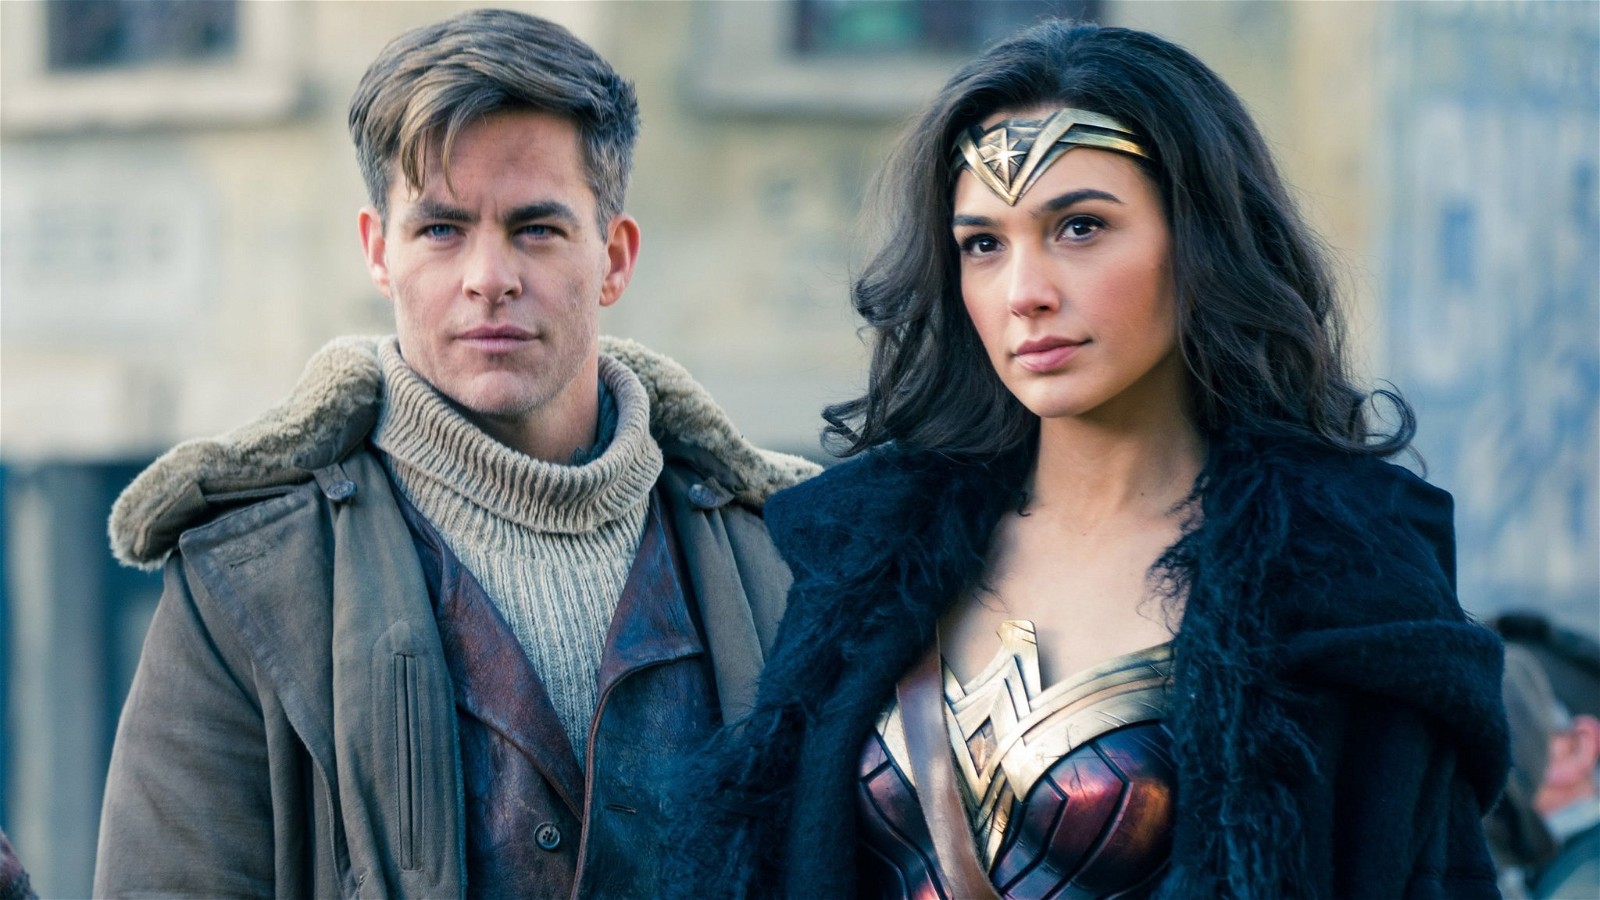 Chris Pine and Gal Gadot in a still from Wonder Woman 1984